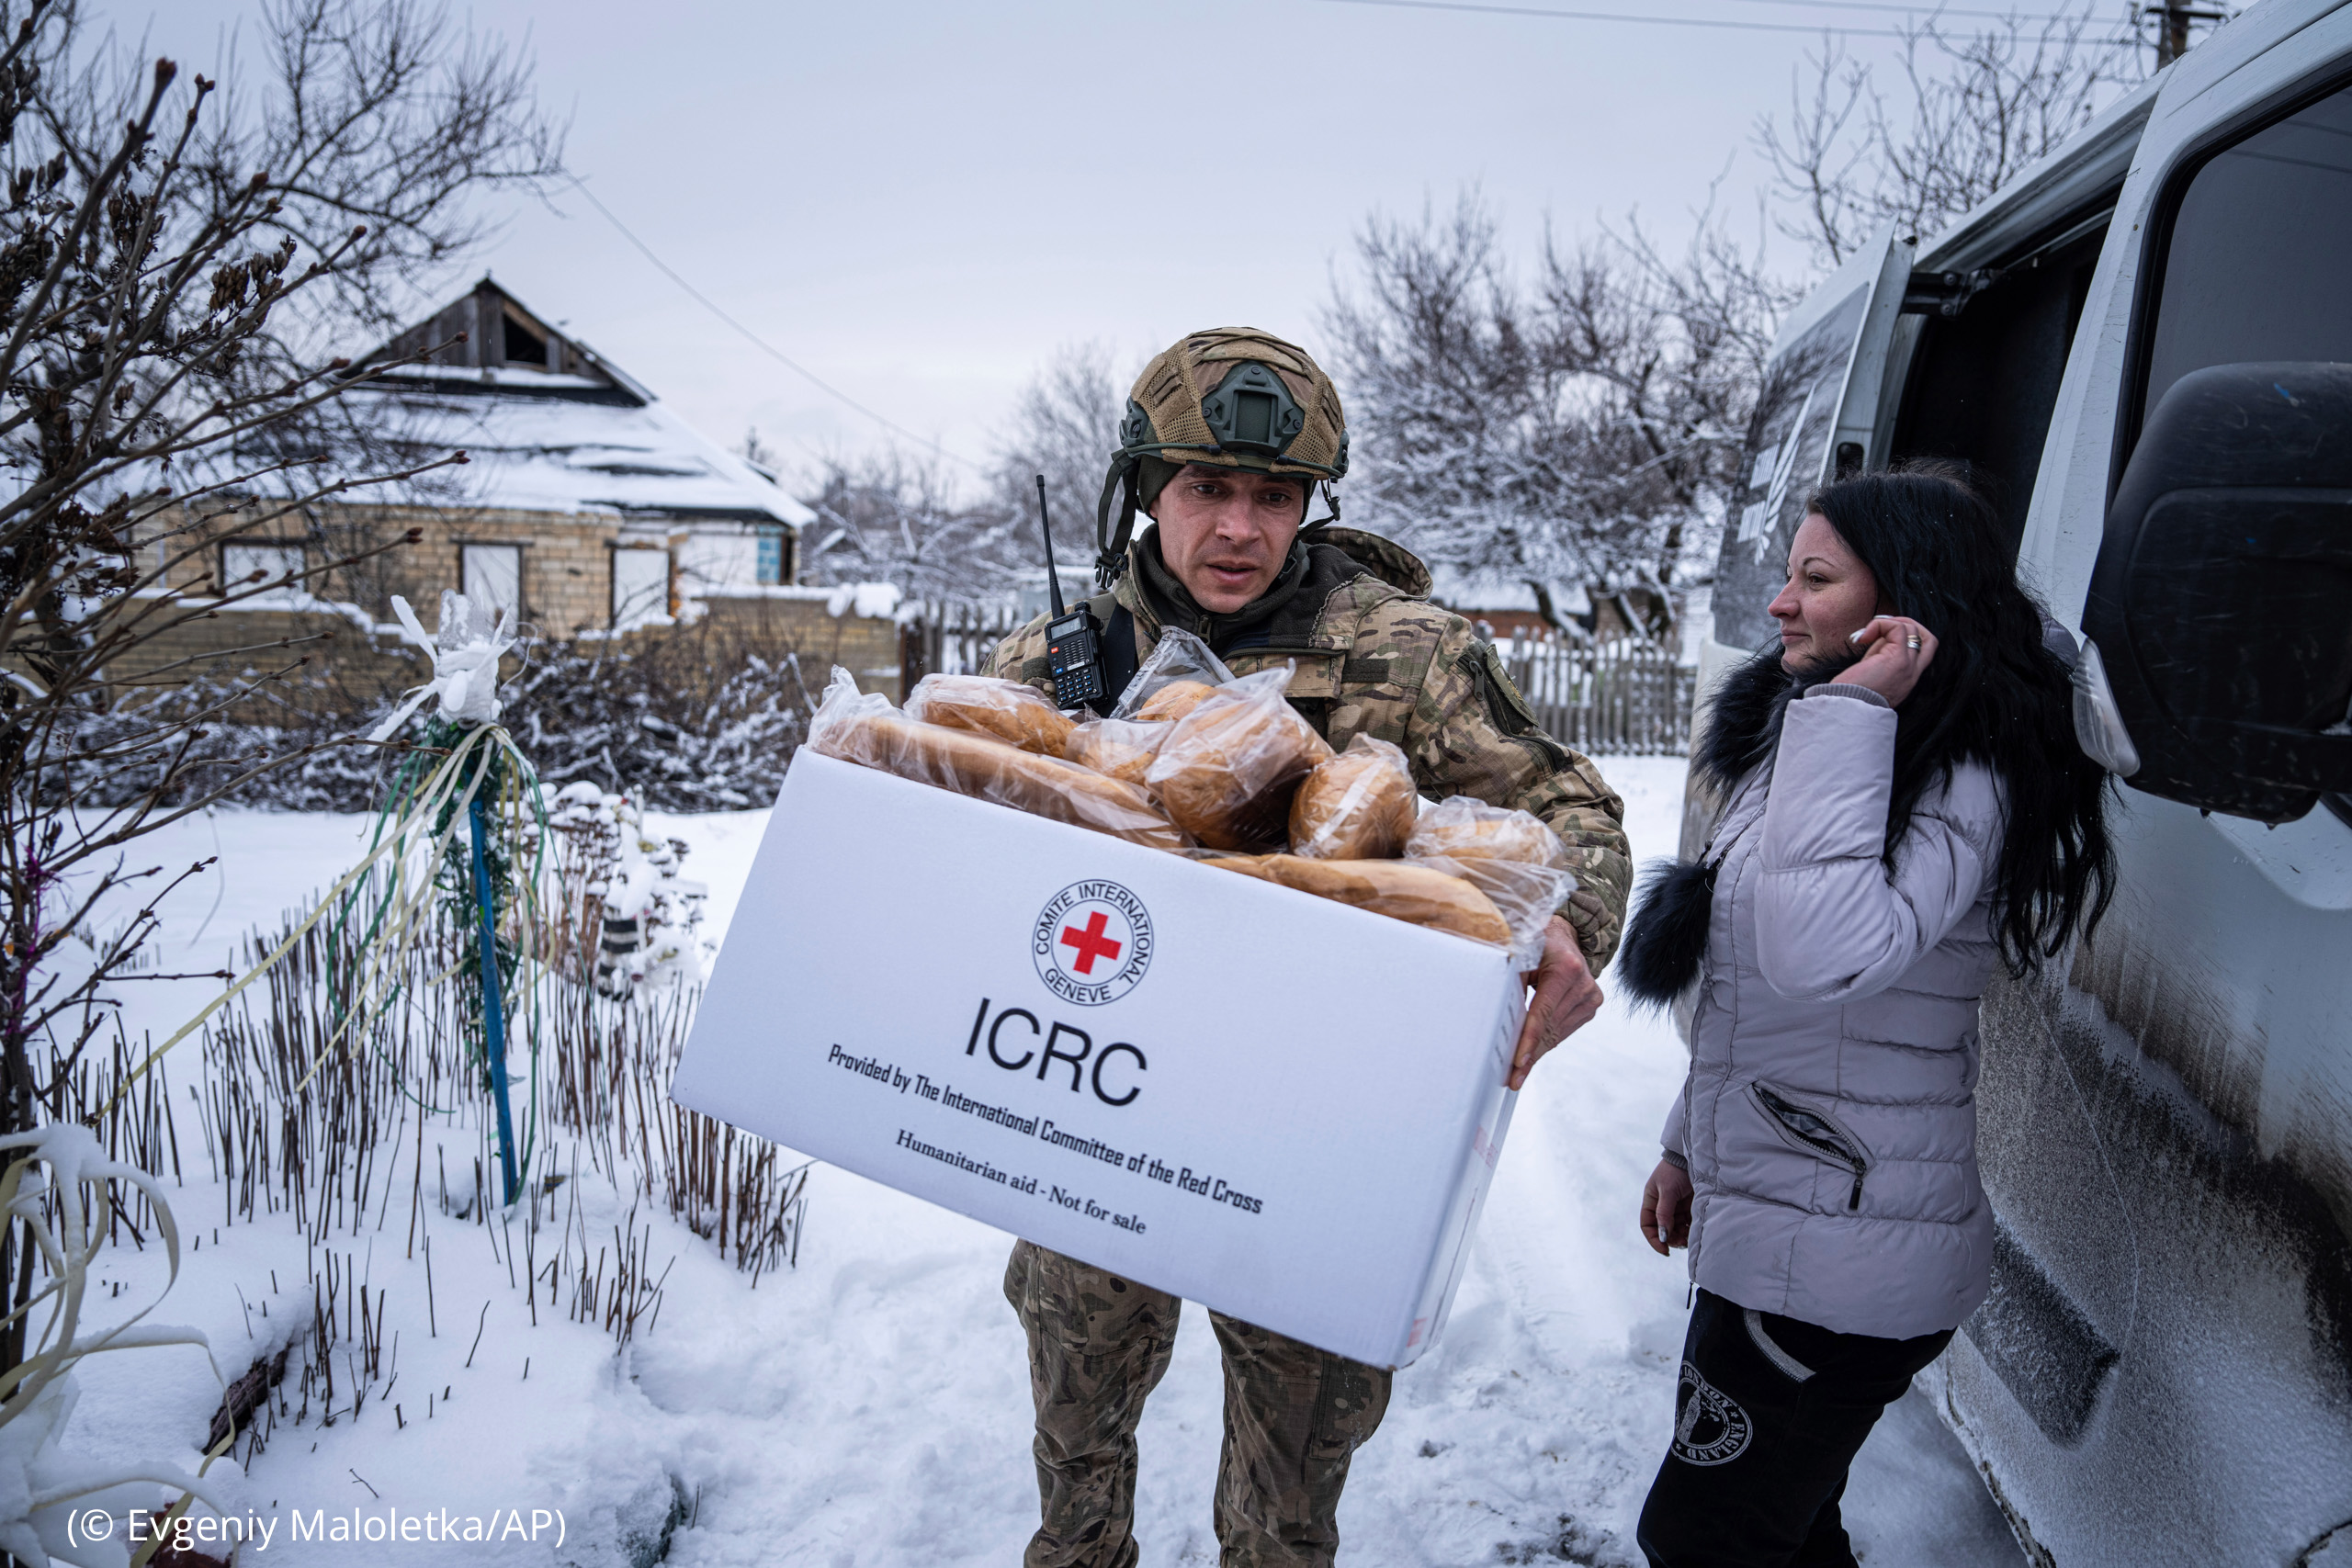 Man in uniform carrying filled box labeled 'ICRC' (© Evgeniy Maloletka/AP)